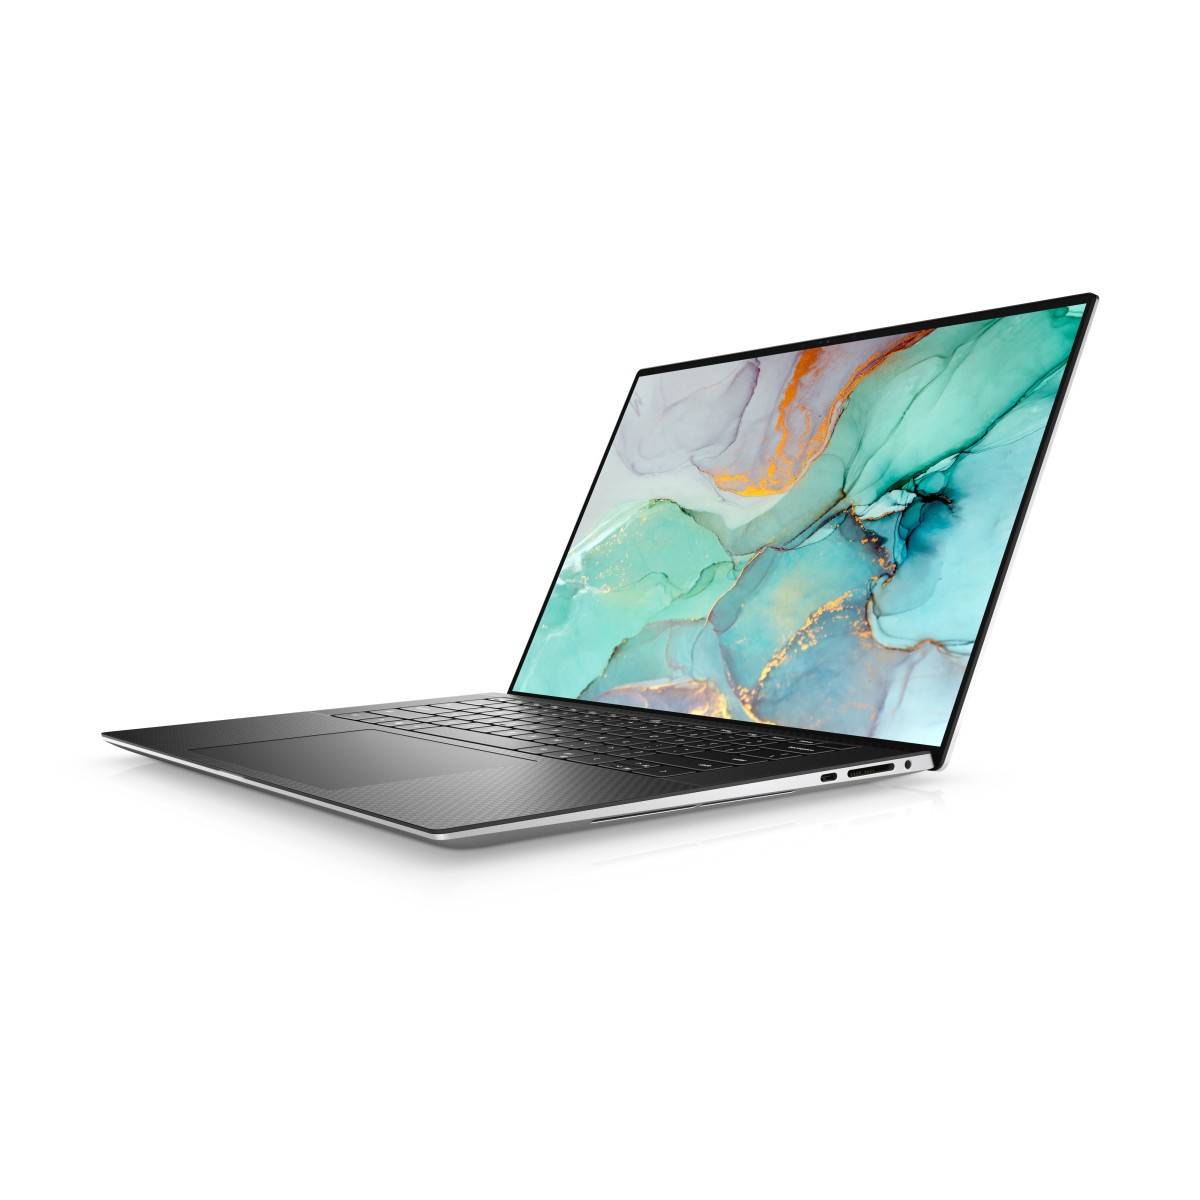 Dell XPS 15 left angle in black